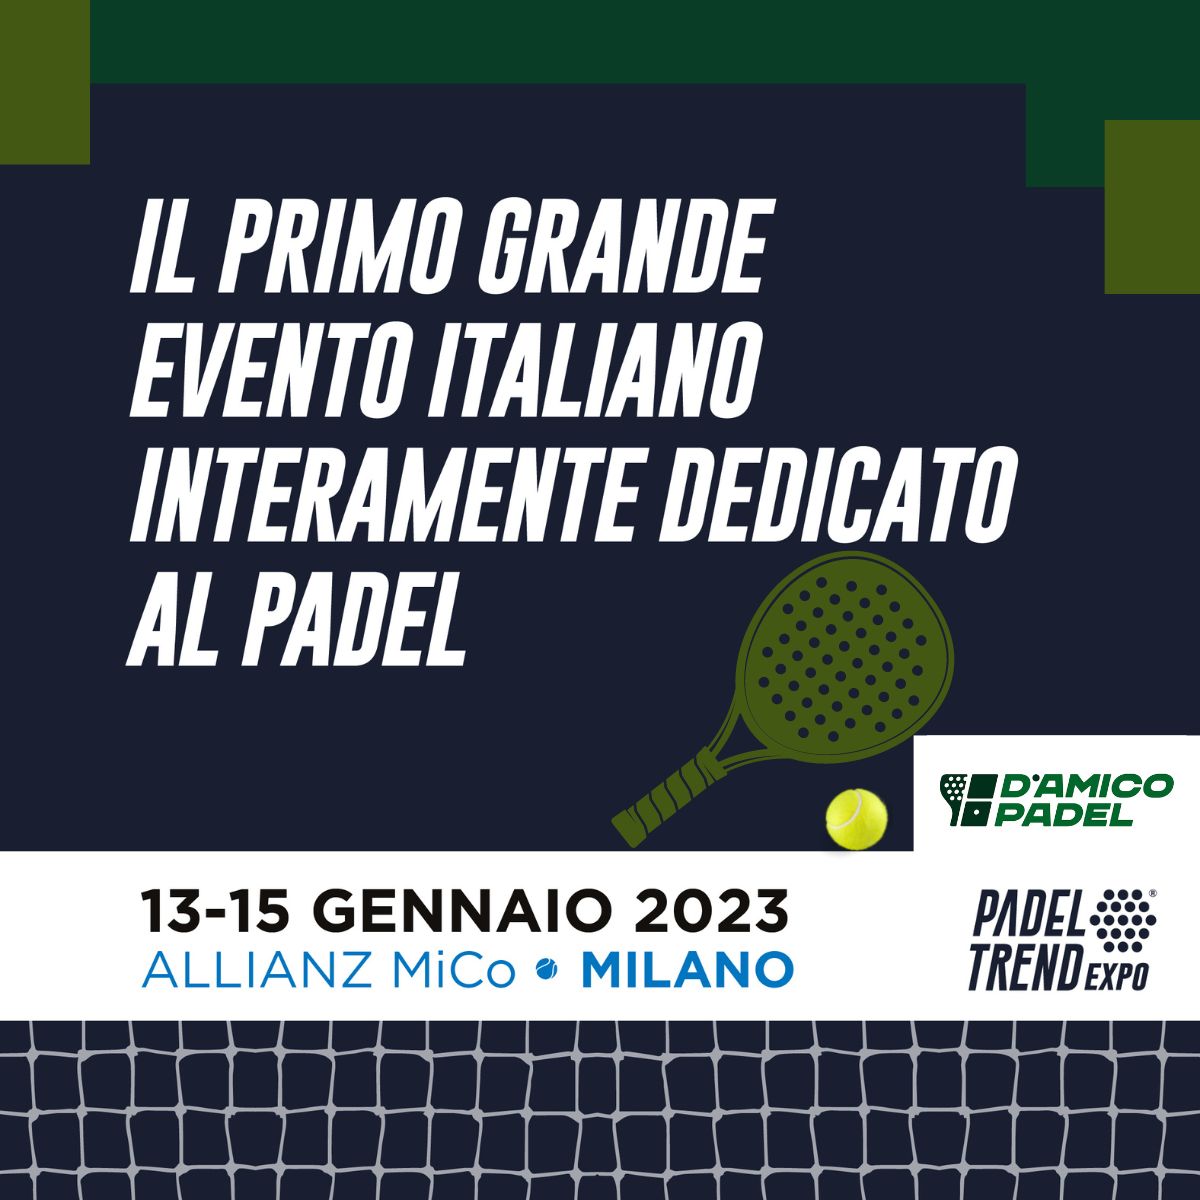 PADEL TREND EXPO OFFICINE D'AMICO